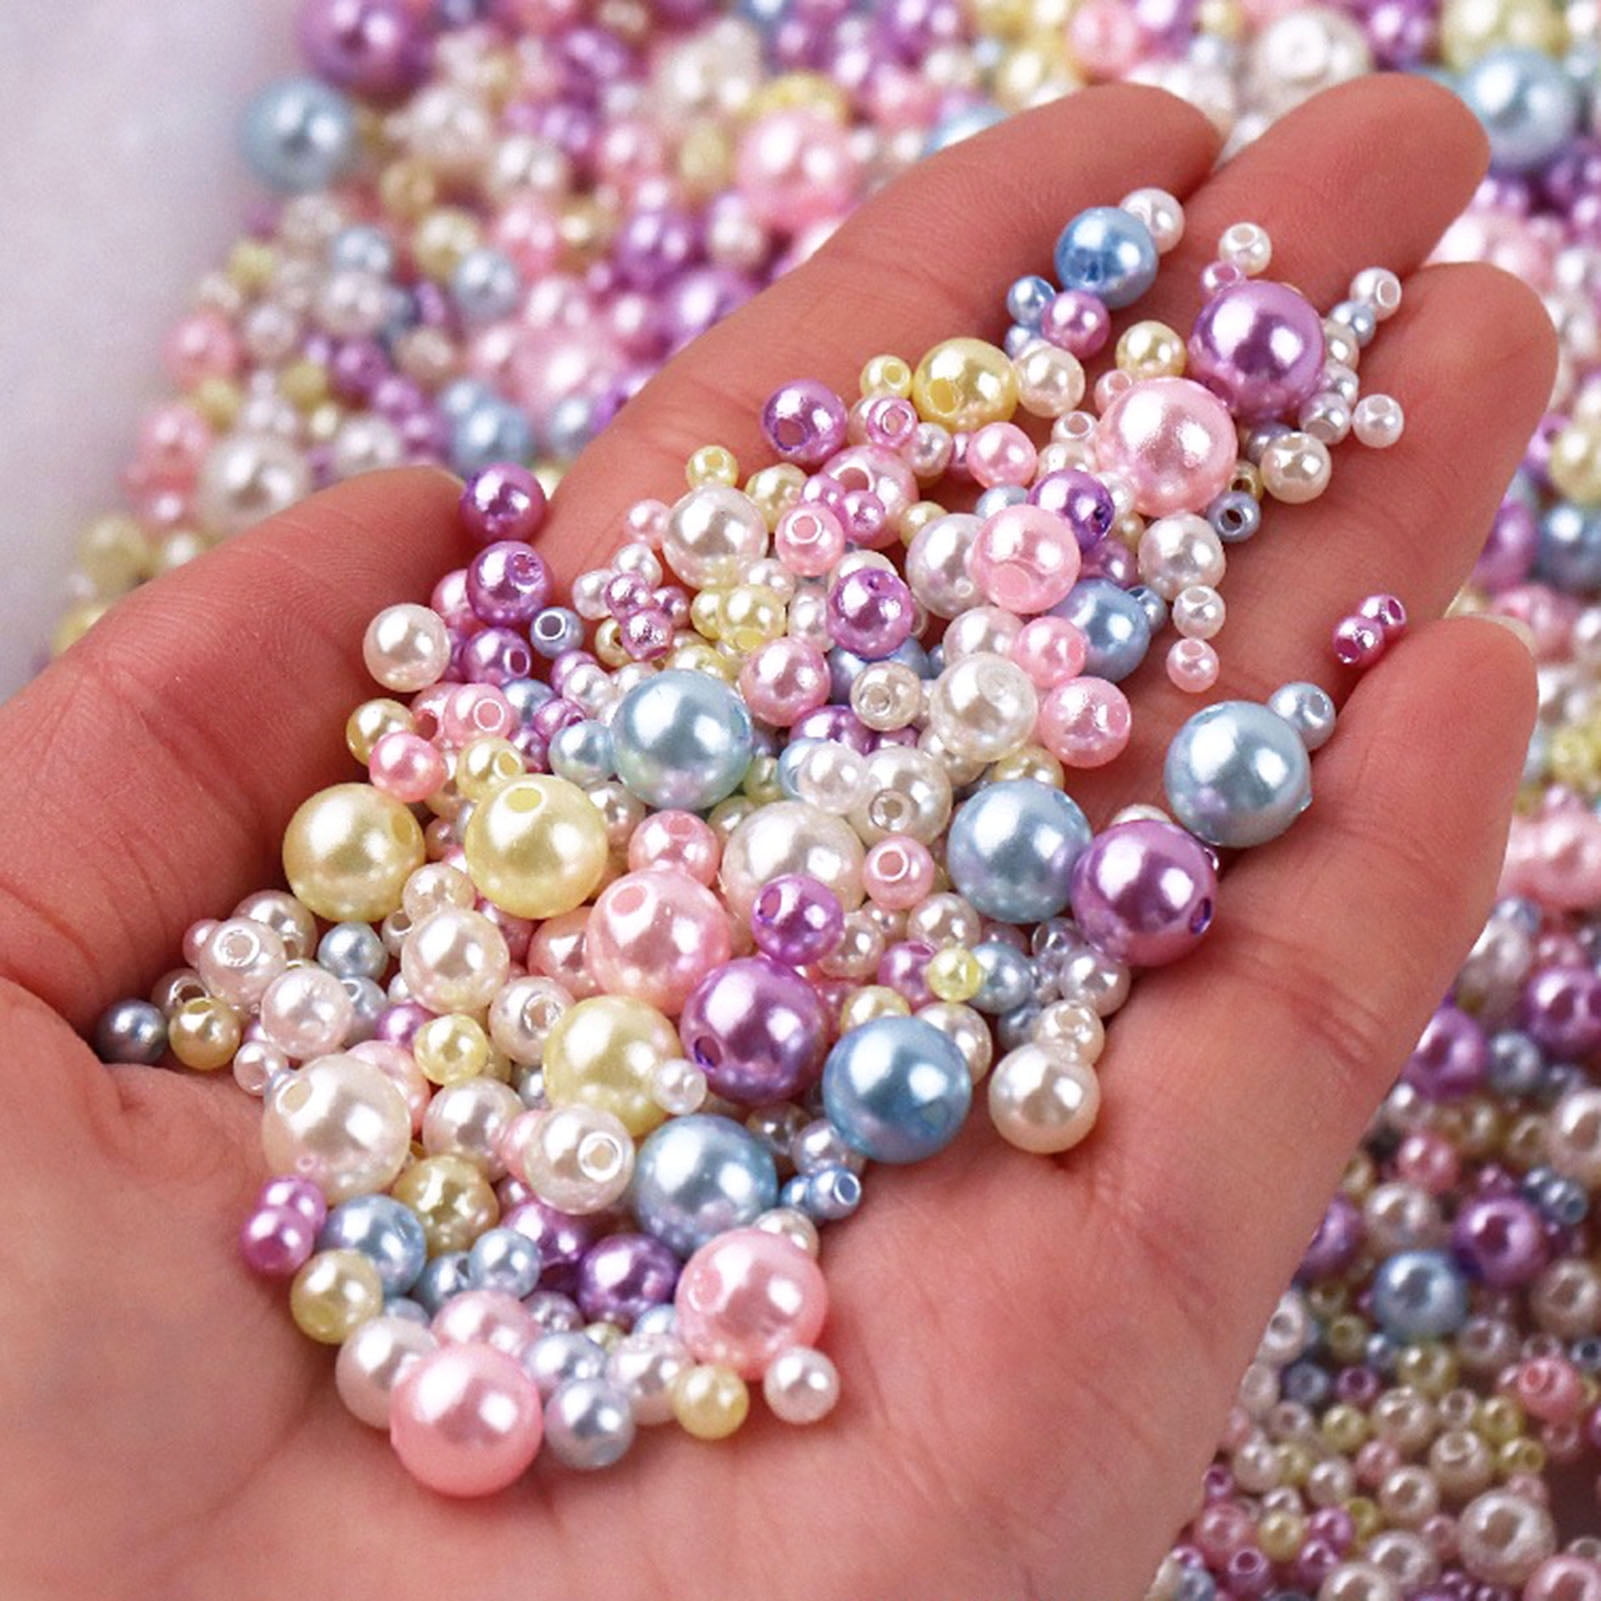 NEW 100PCS 4mm Glass Round Pearl Spacer Loose Beads Pattern Jewelry Making 40